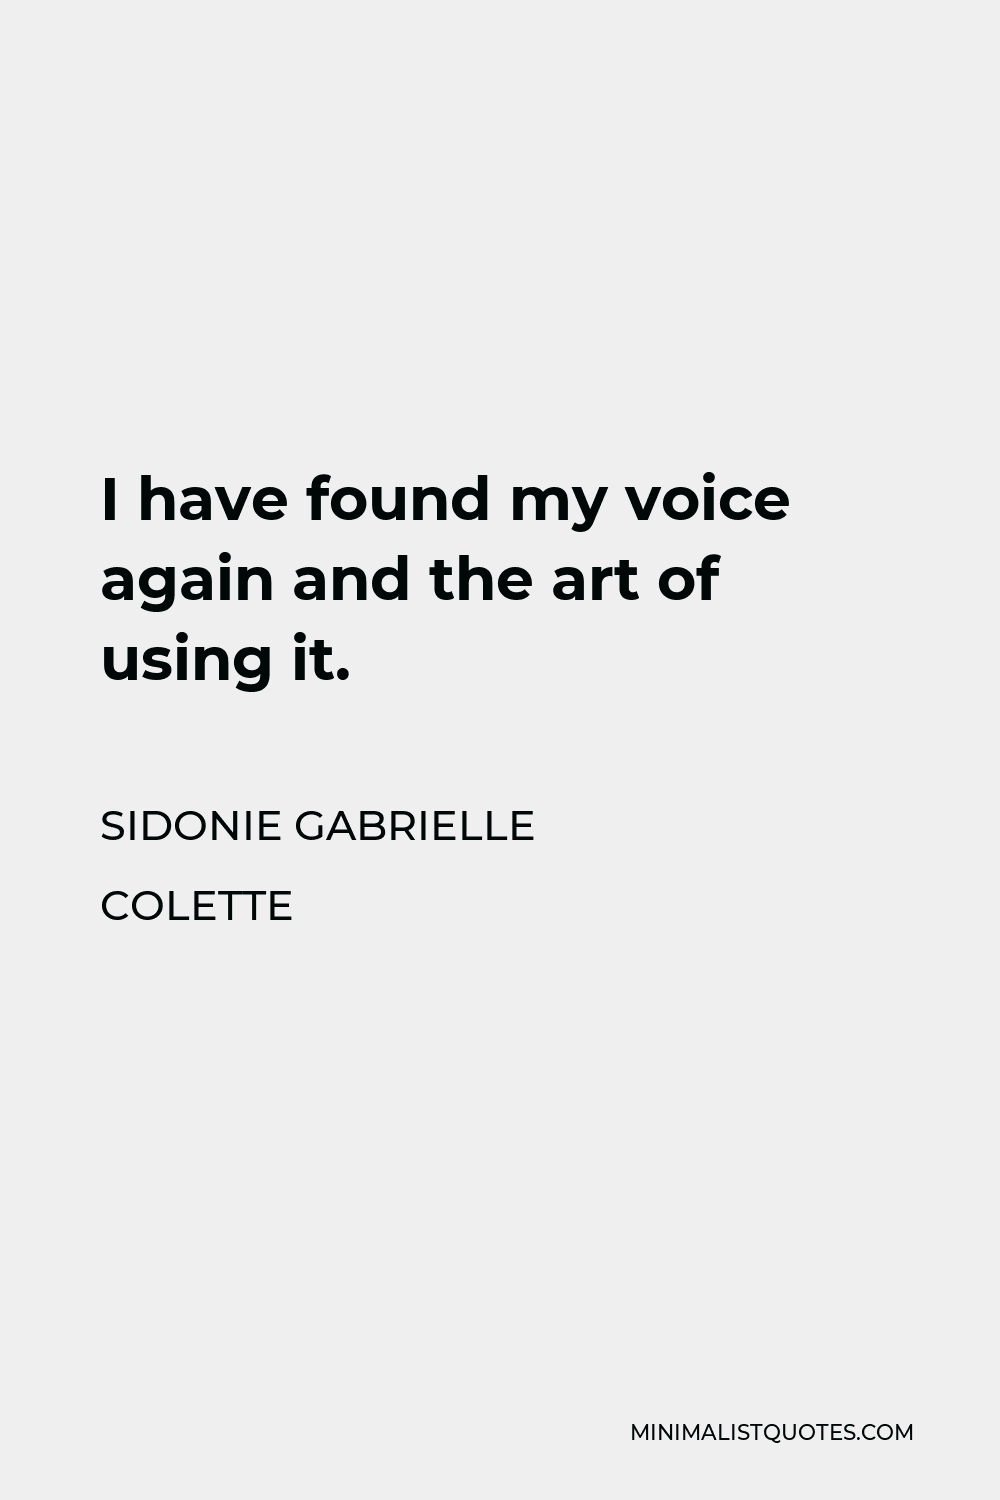 Sidonie Gabrielle Colette Quote - I have found my voice again and the art of using it.